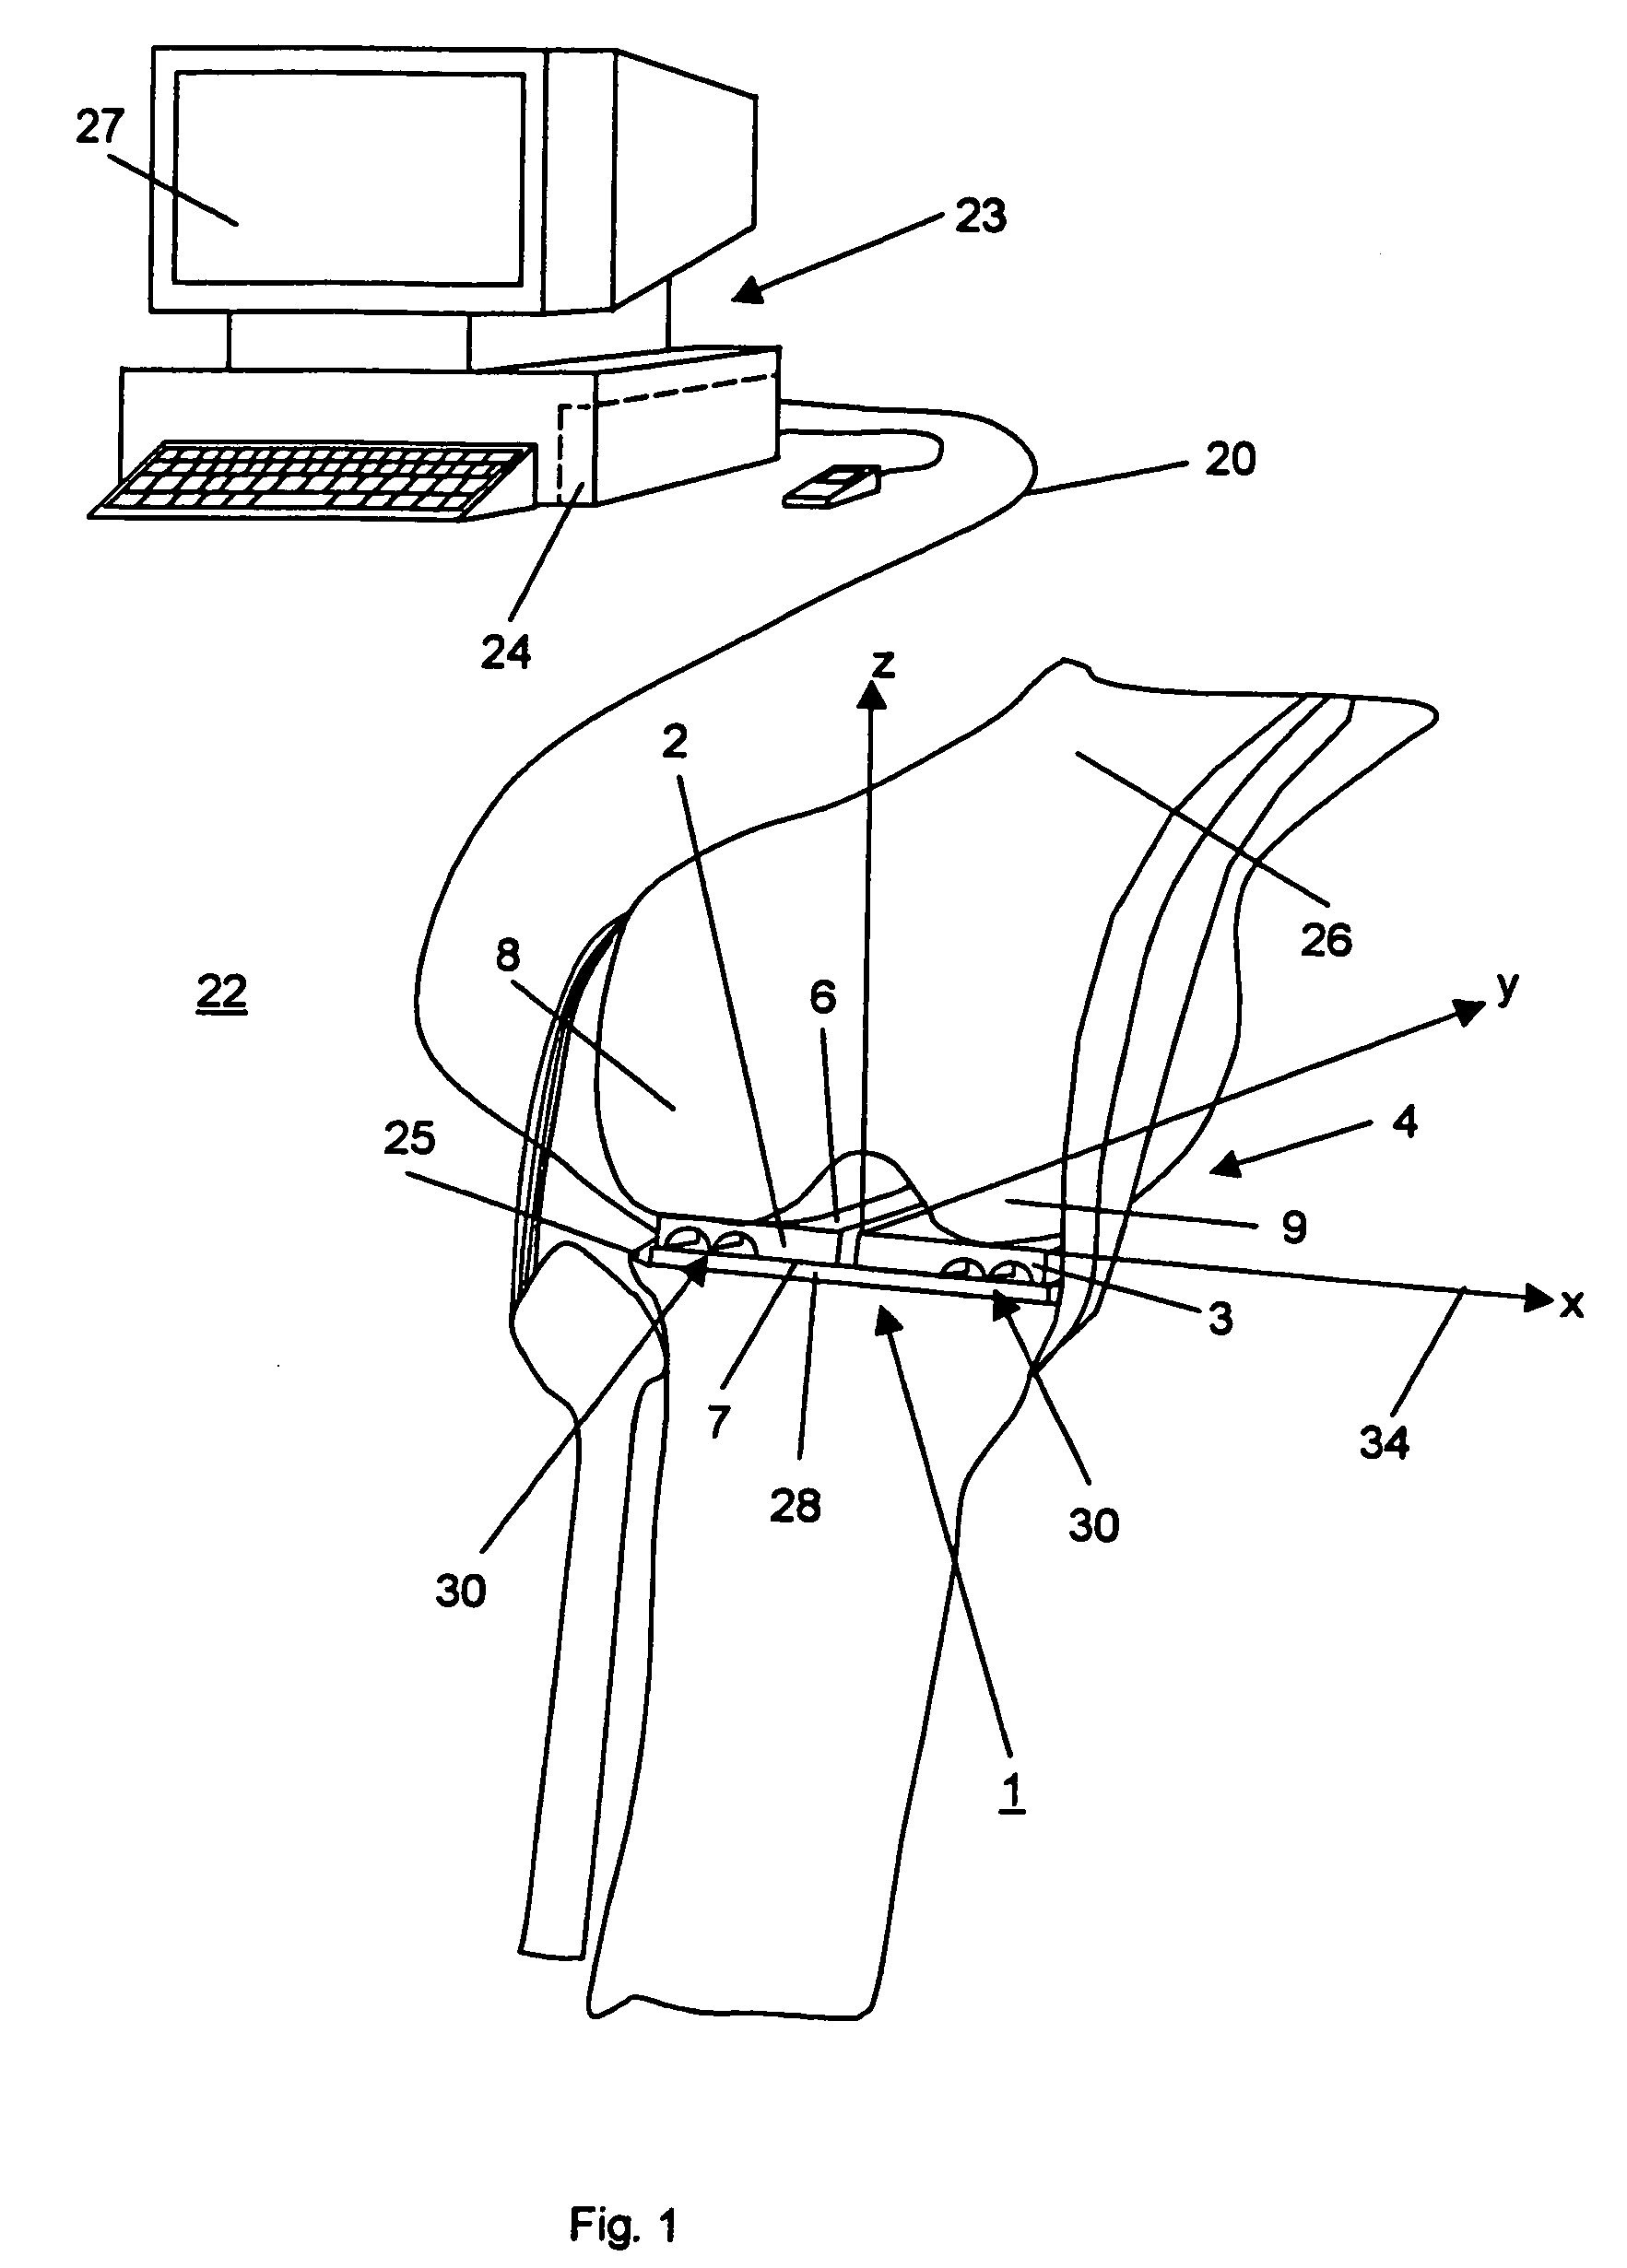 Device for measuring tibio-femoral force amplitudes and force locations in total knee arthroplasty